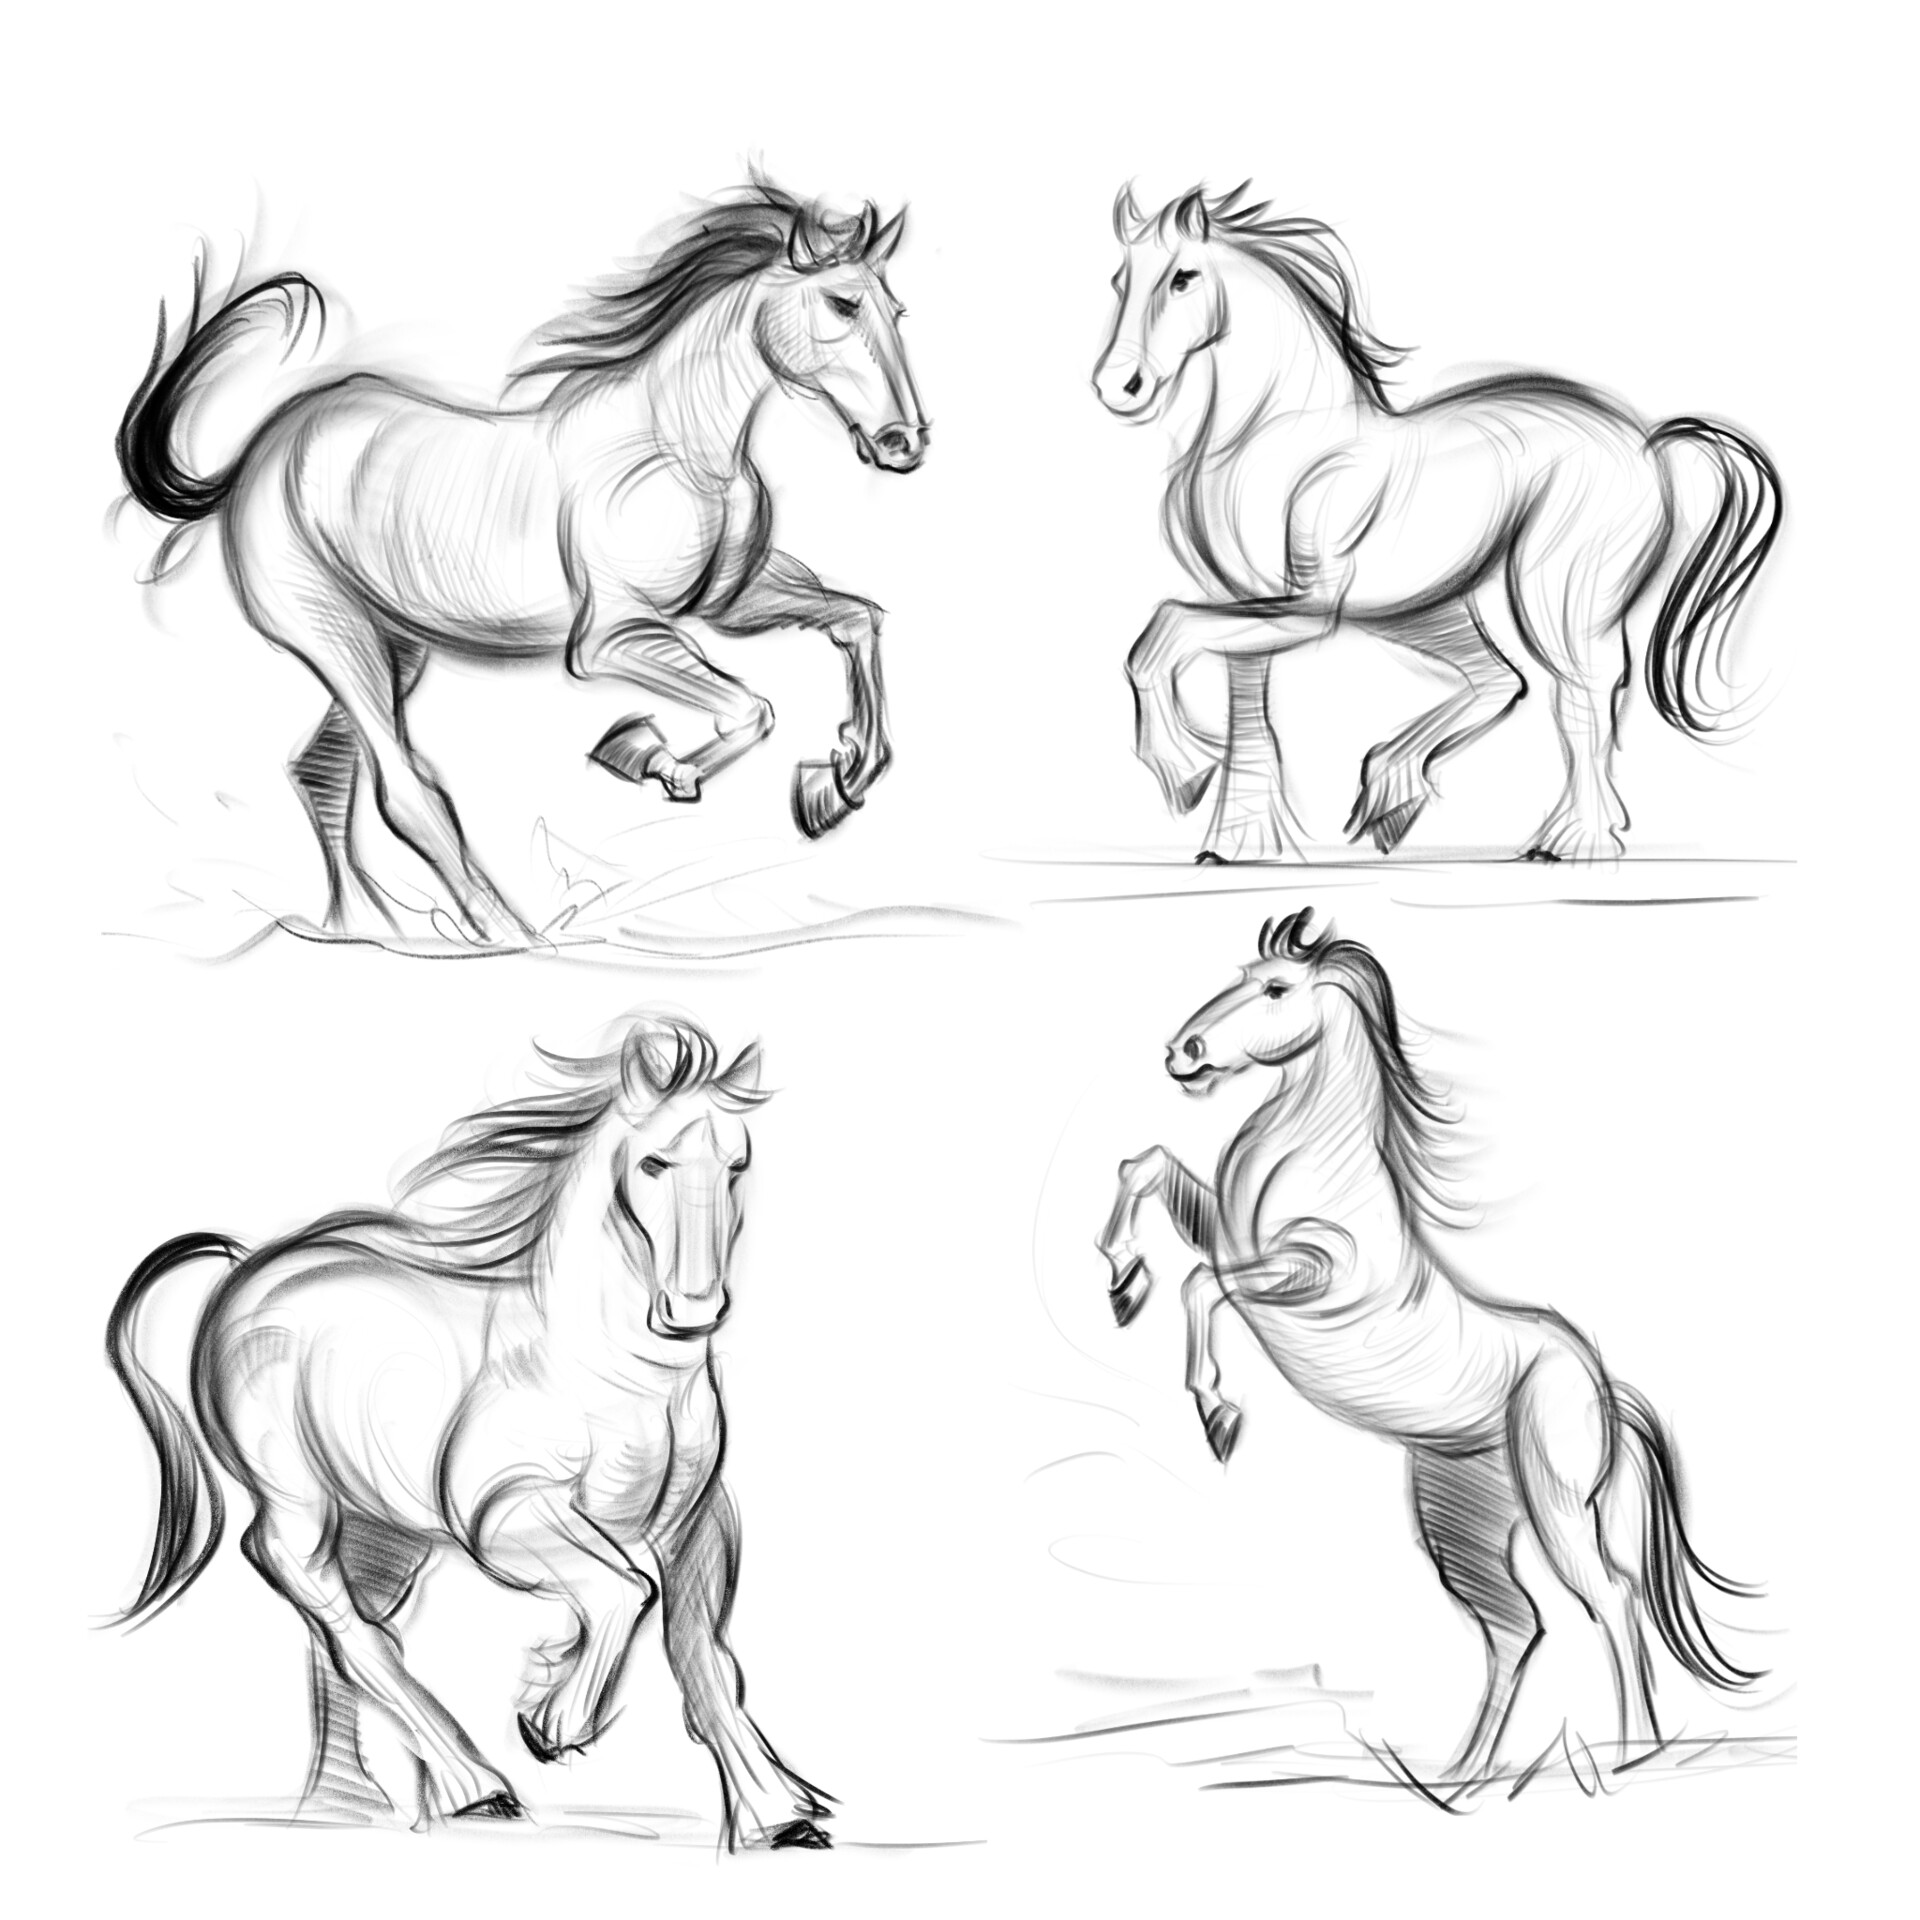 Horse Poses: Study1 by FlameFoxe on DeviantArt